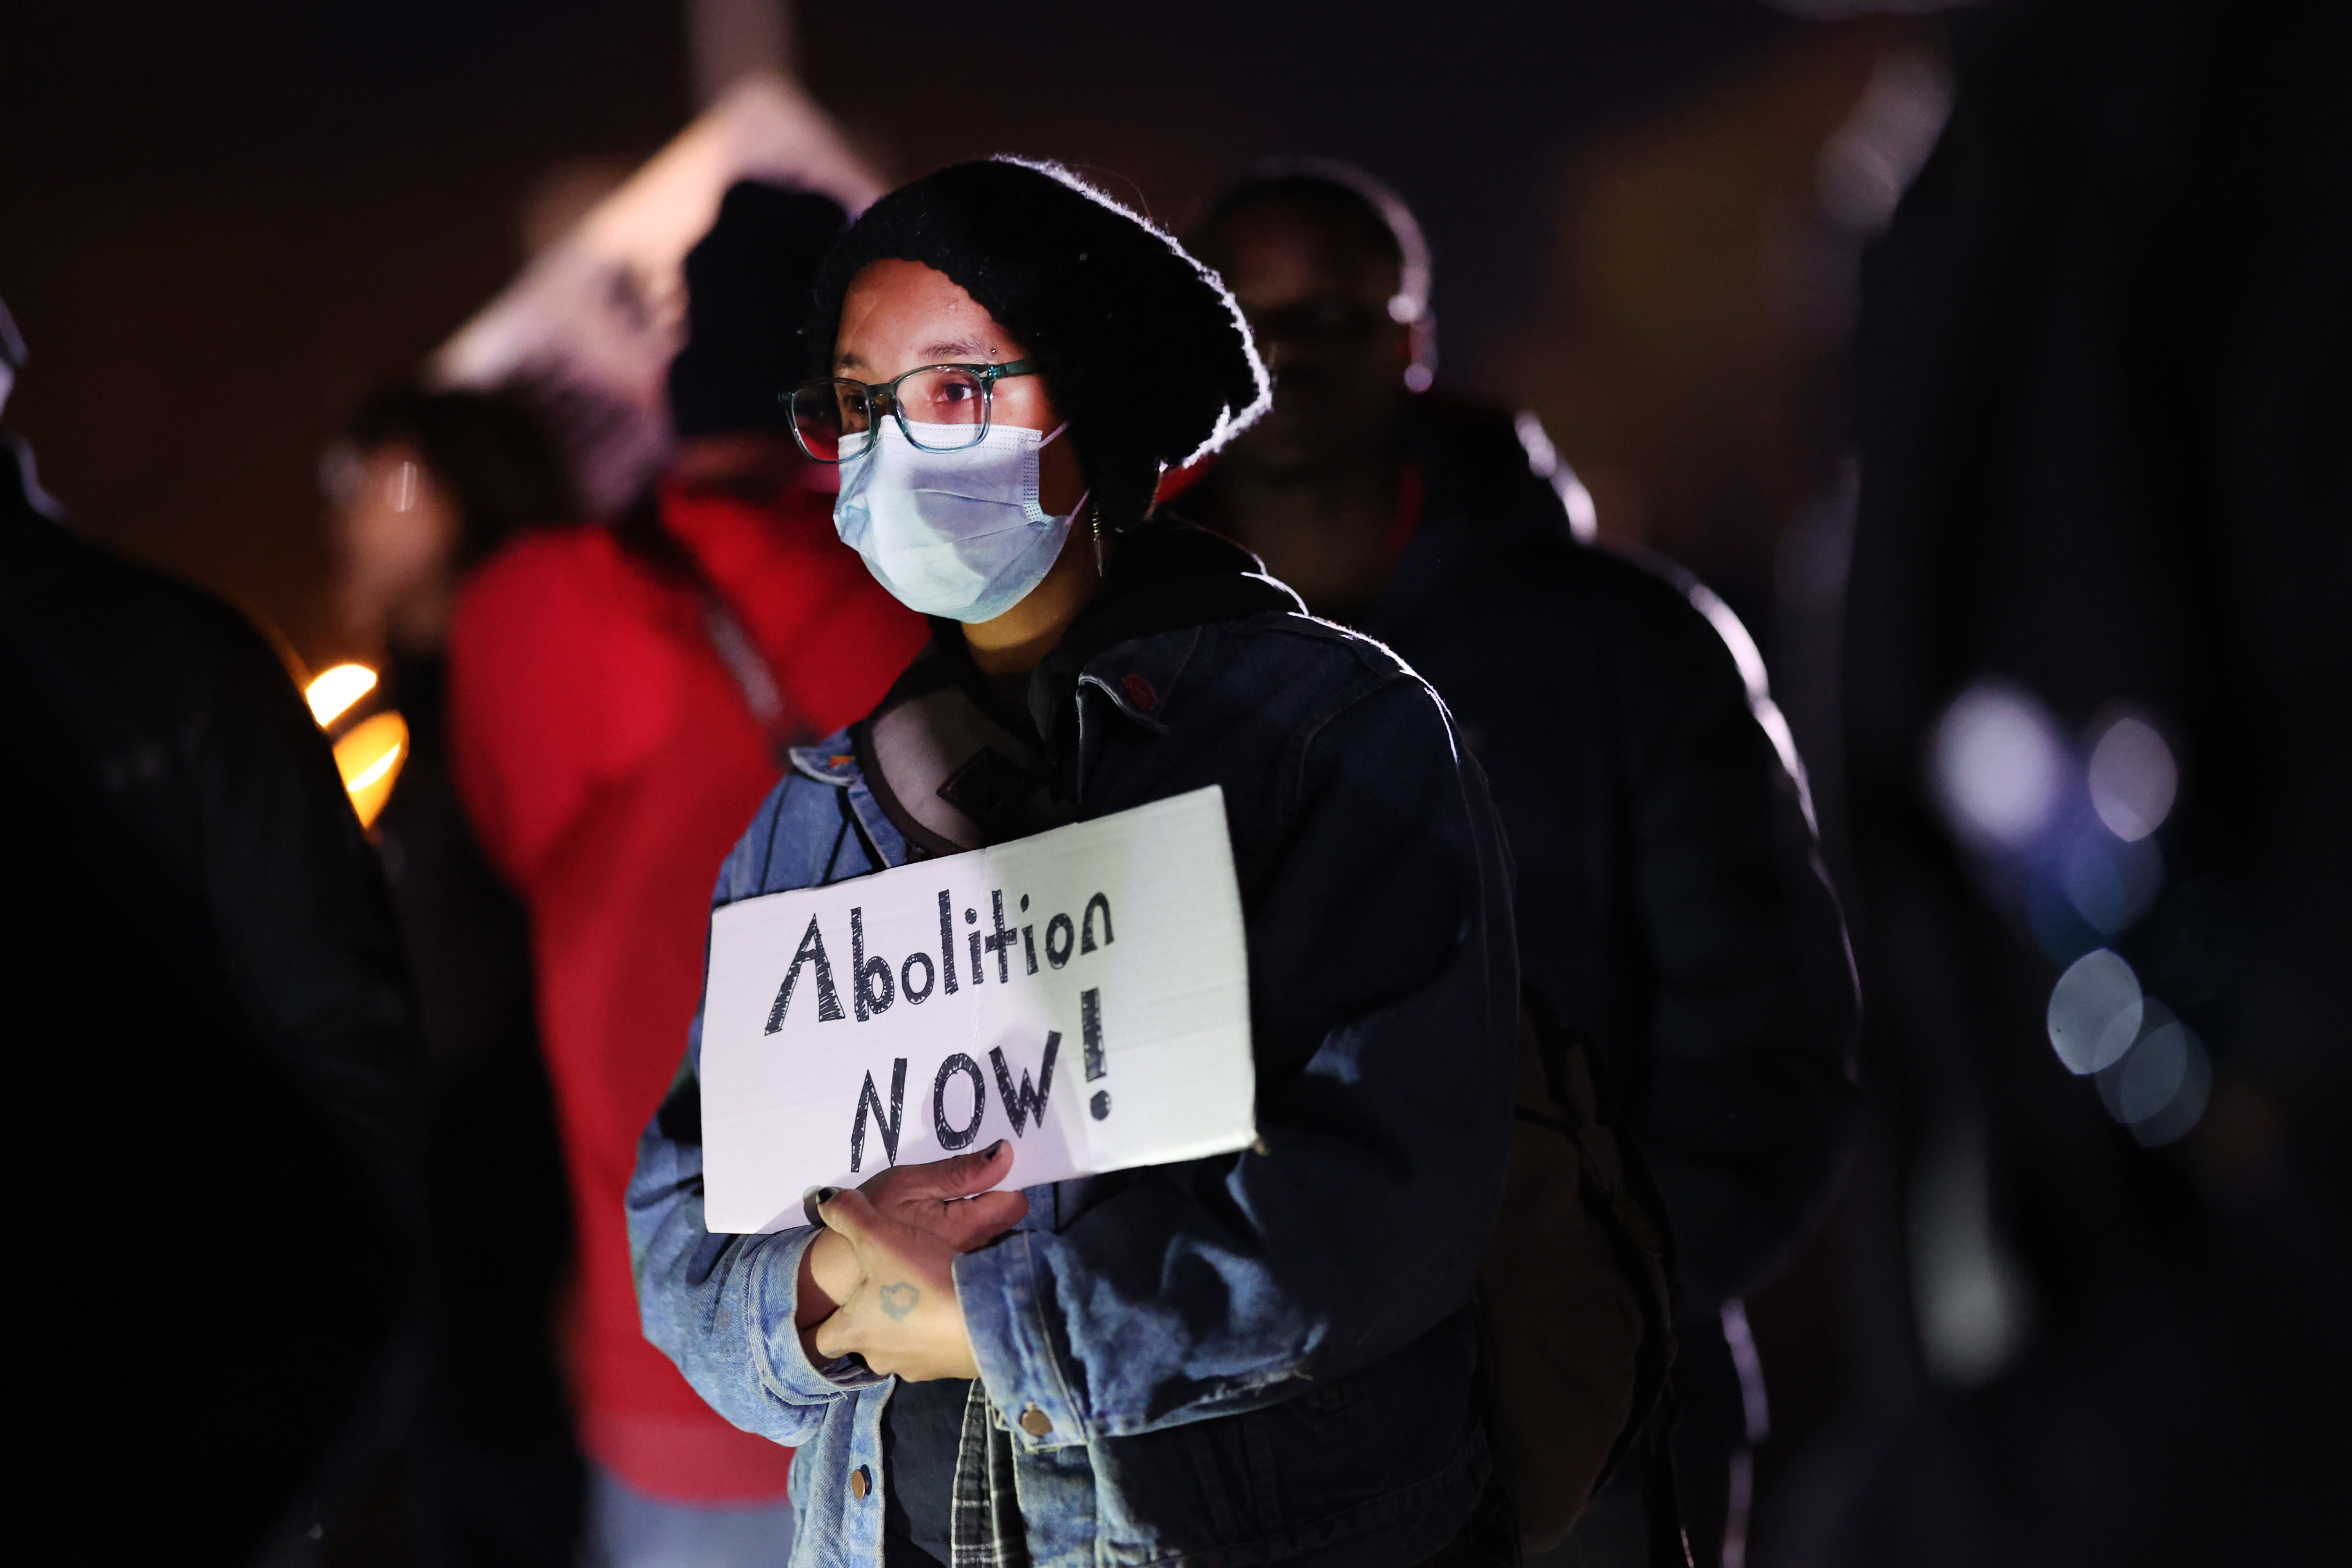 A demonstrator holds a sign reading “Abolition NOW!” at a protest over the death of Tyre Nichols in Memphis, Tennessee. 